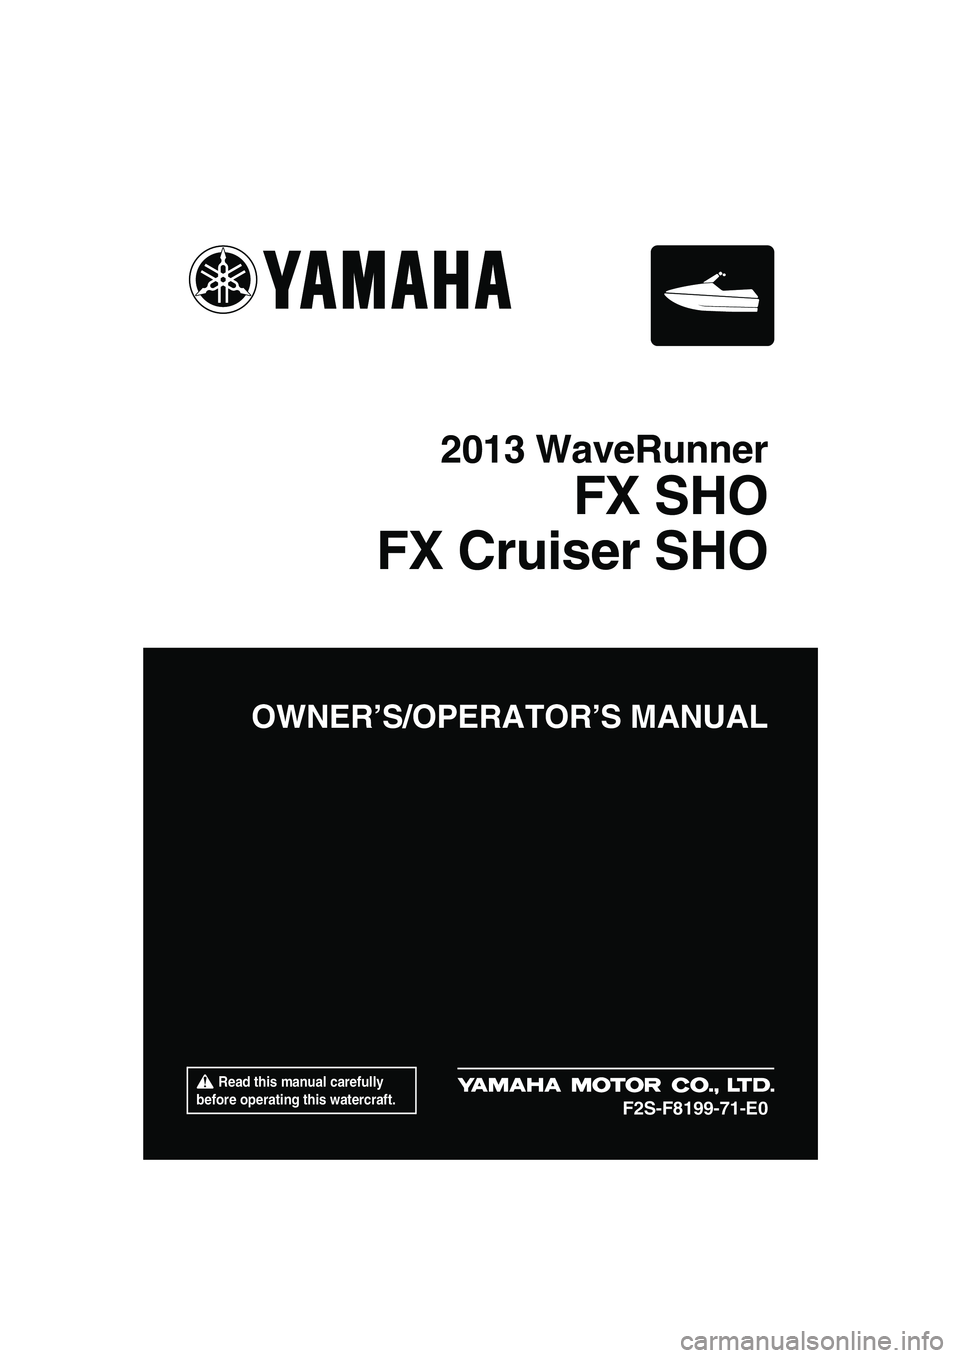 YAMAHA FX HO CRUISER 2013  Owners Manual  Read this manual carefully 
before operating this watercraft.
OWNER’S/OPERATOR’S MANUAL
2013 WaveRunner
FX SHO
FX Cruiser SHO
F2S-F8199-71-E0
UF2S71E0.book  Page 1  Tuesday, August 21, 2012  2:33